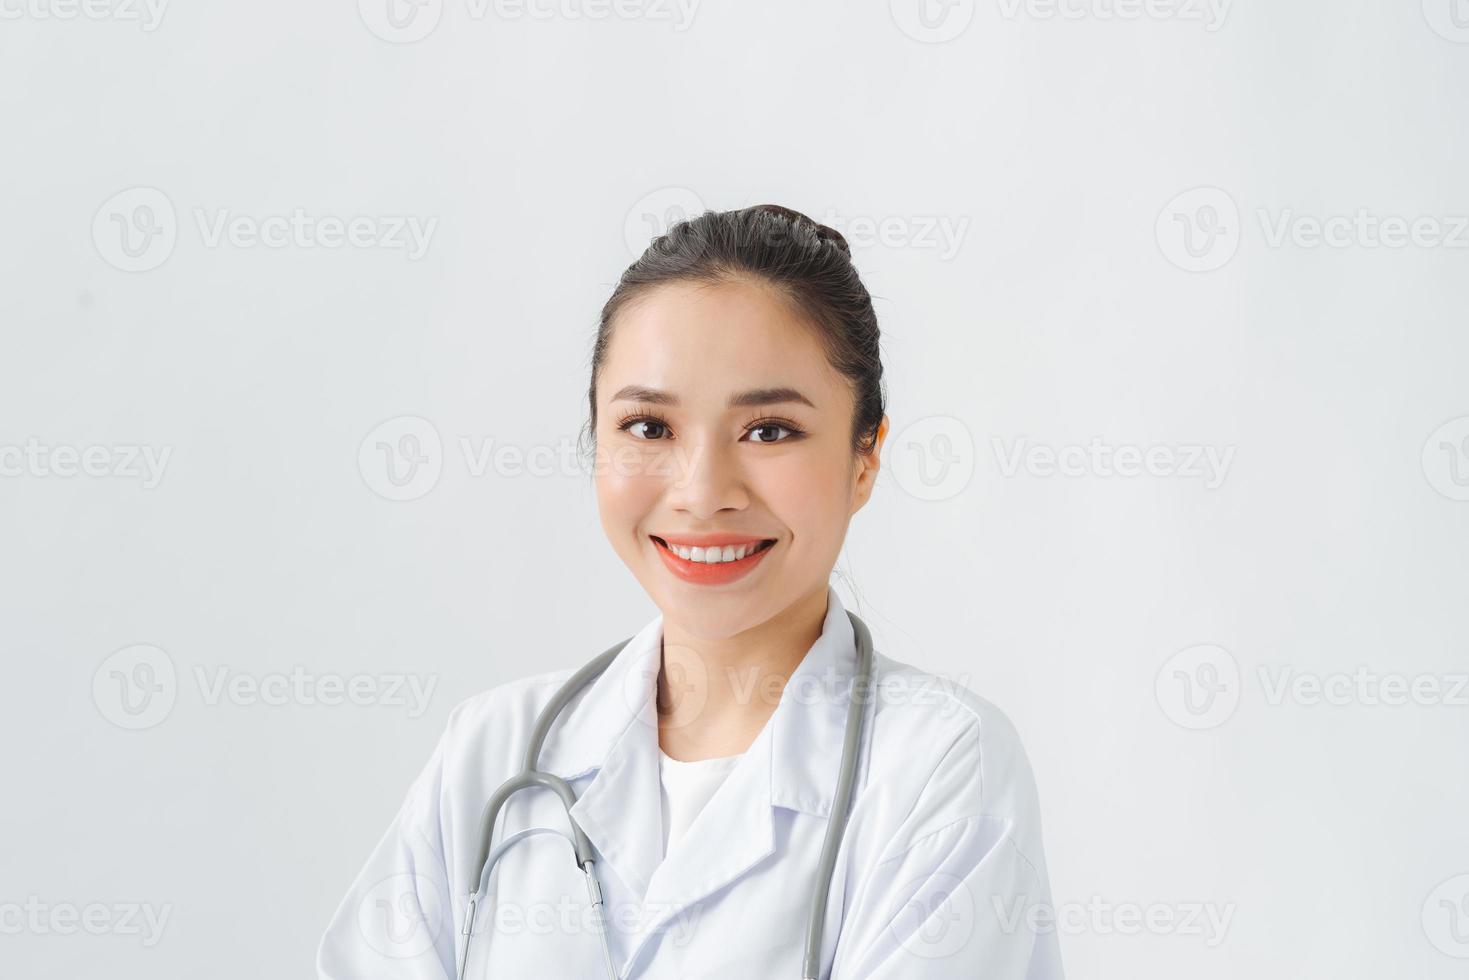 Woman in medical gown, stethoscope in consulting room photo